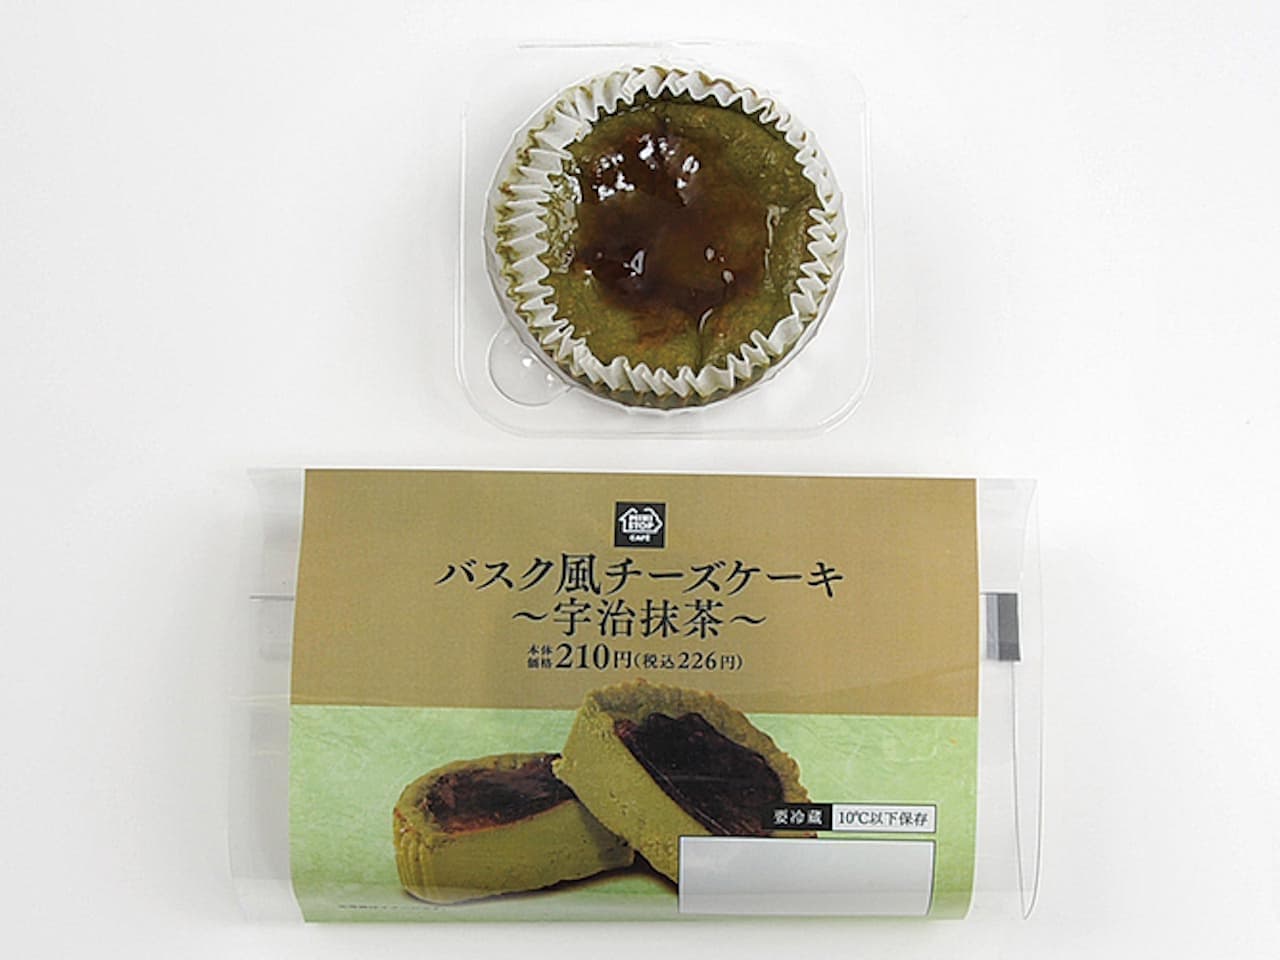 From "Basque-style cheese cake-Uji matcha-" Ministop